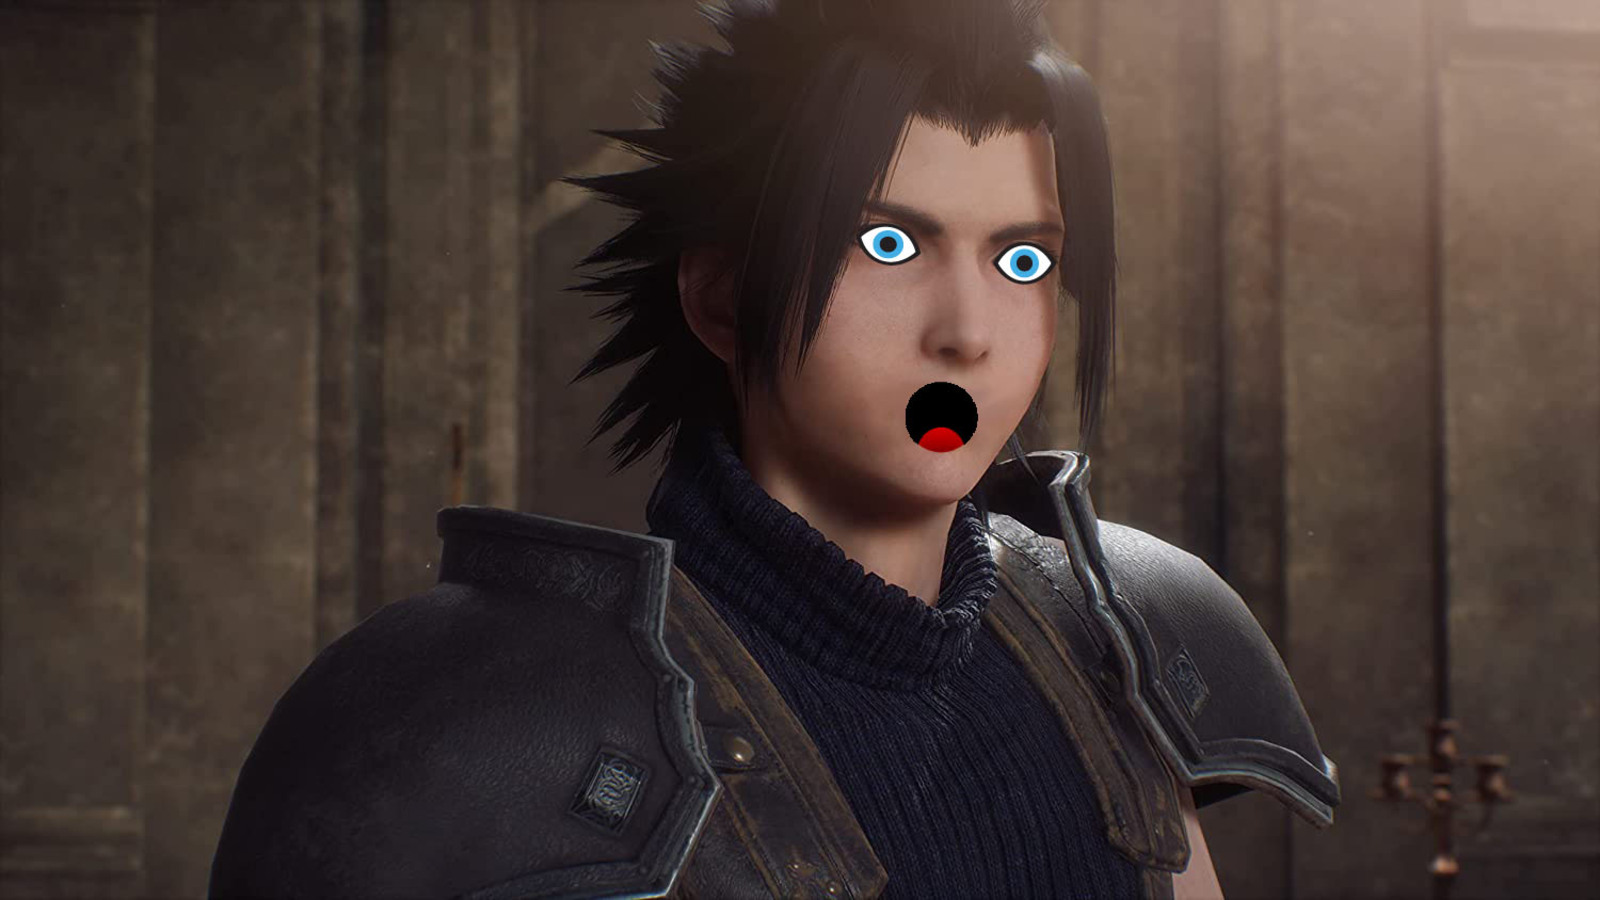 Getty Image watermark spotted in Crisis Core Final Fantasy 7 Reunion